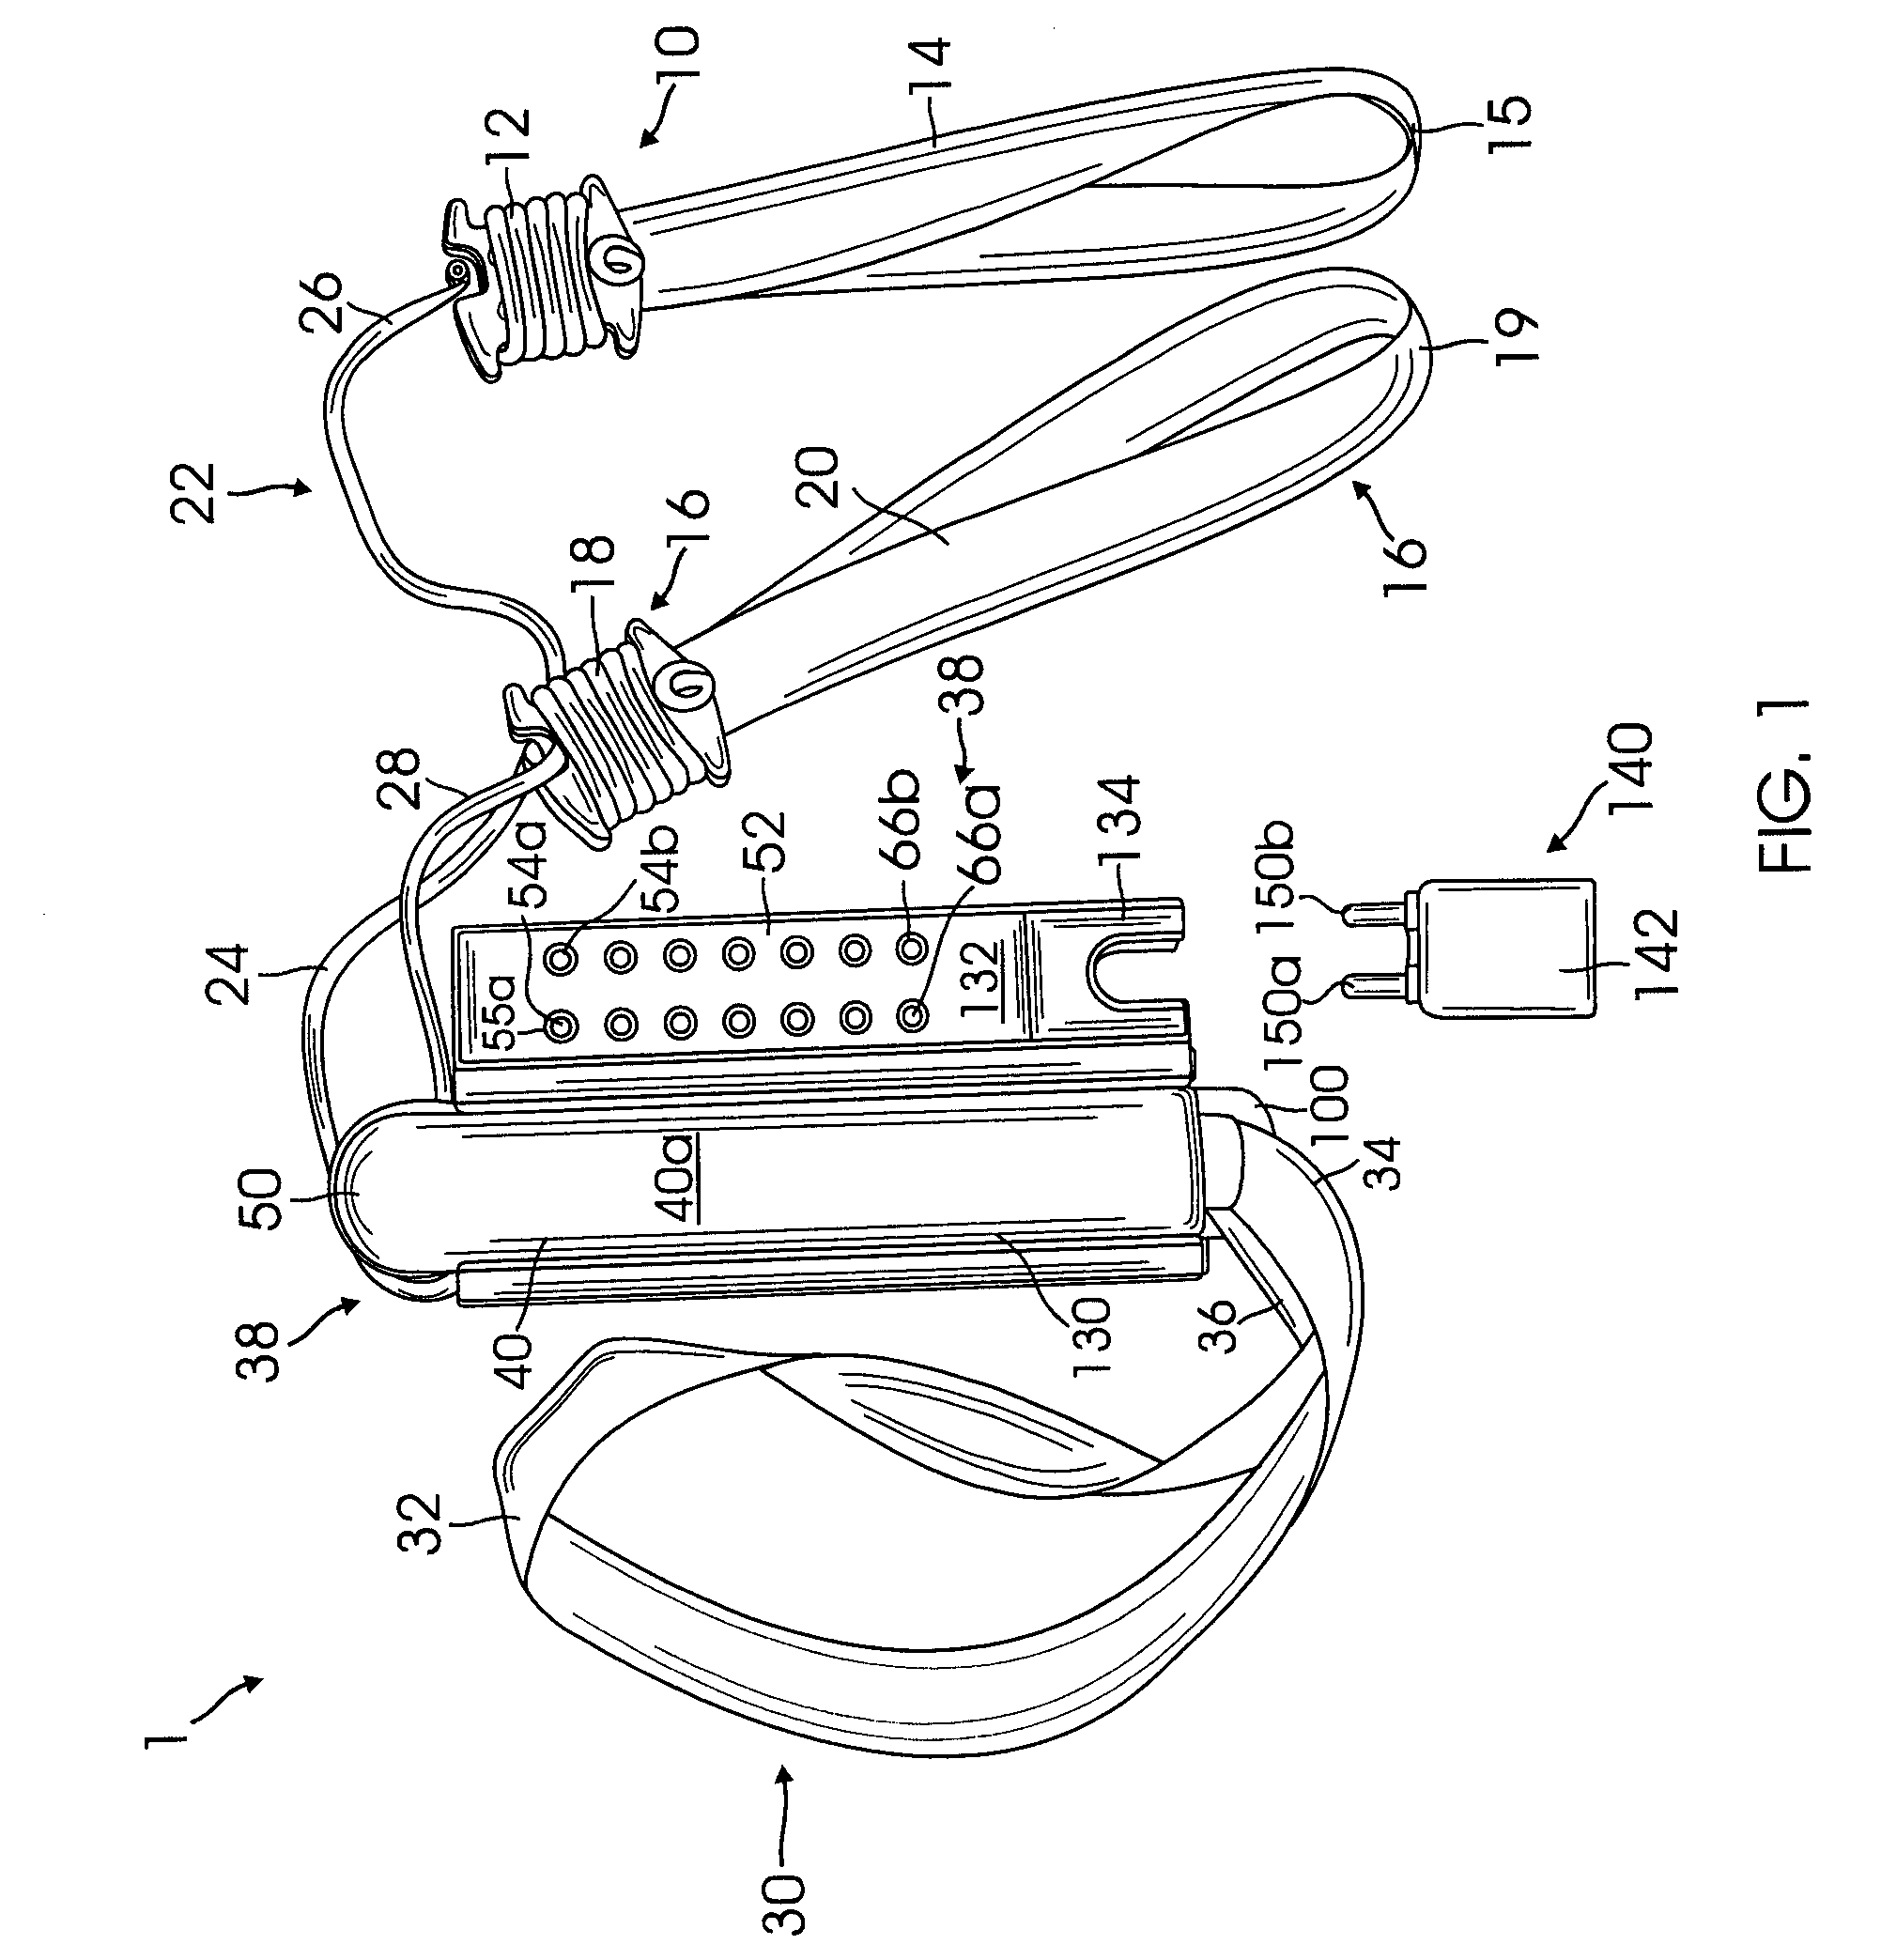 Portable isometric exercise device with resistance generated by a spring force, including an electronic light or sound indicator to signal that a constant force level is being maintained